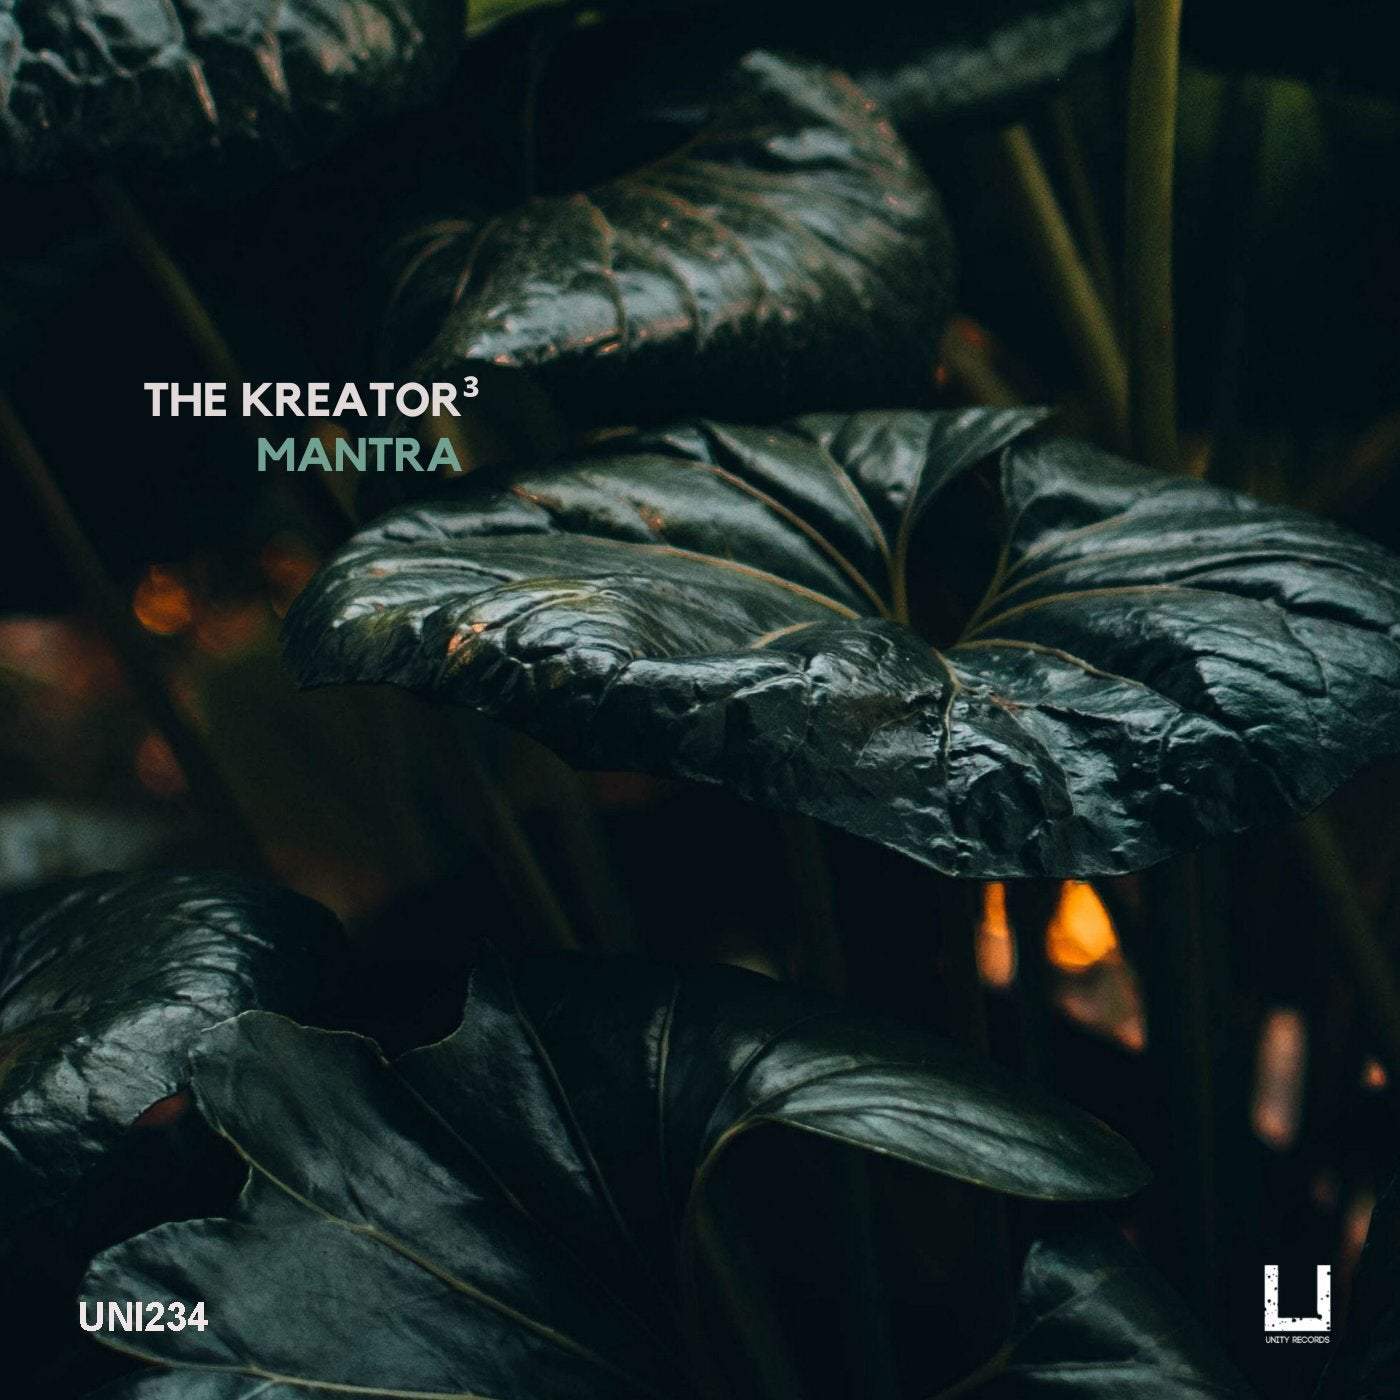 image cover: THE KREATOR³ - Mantra / UNI234